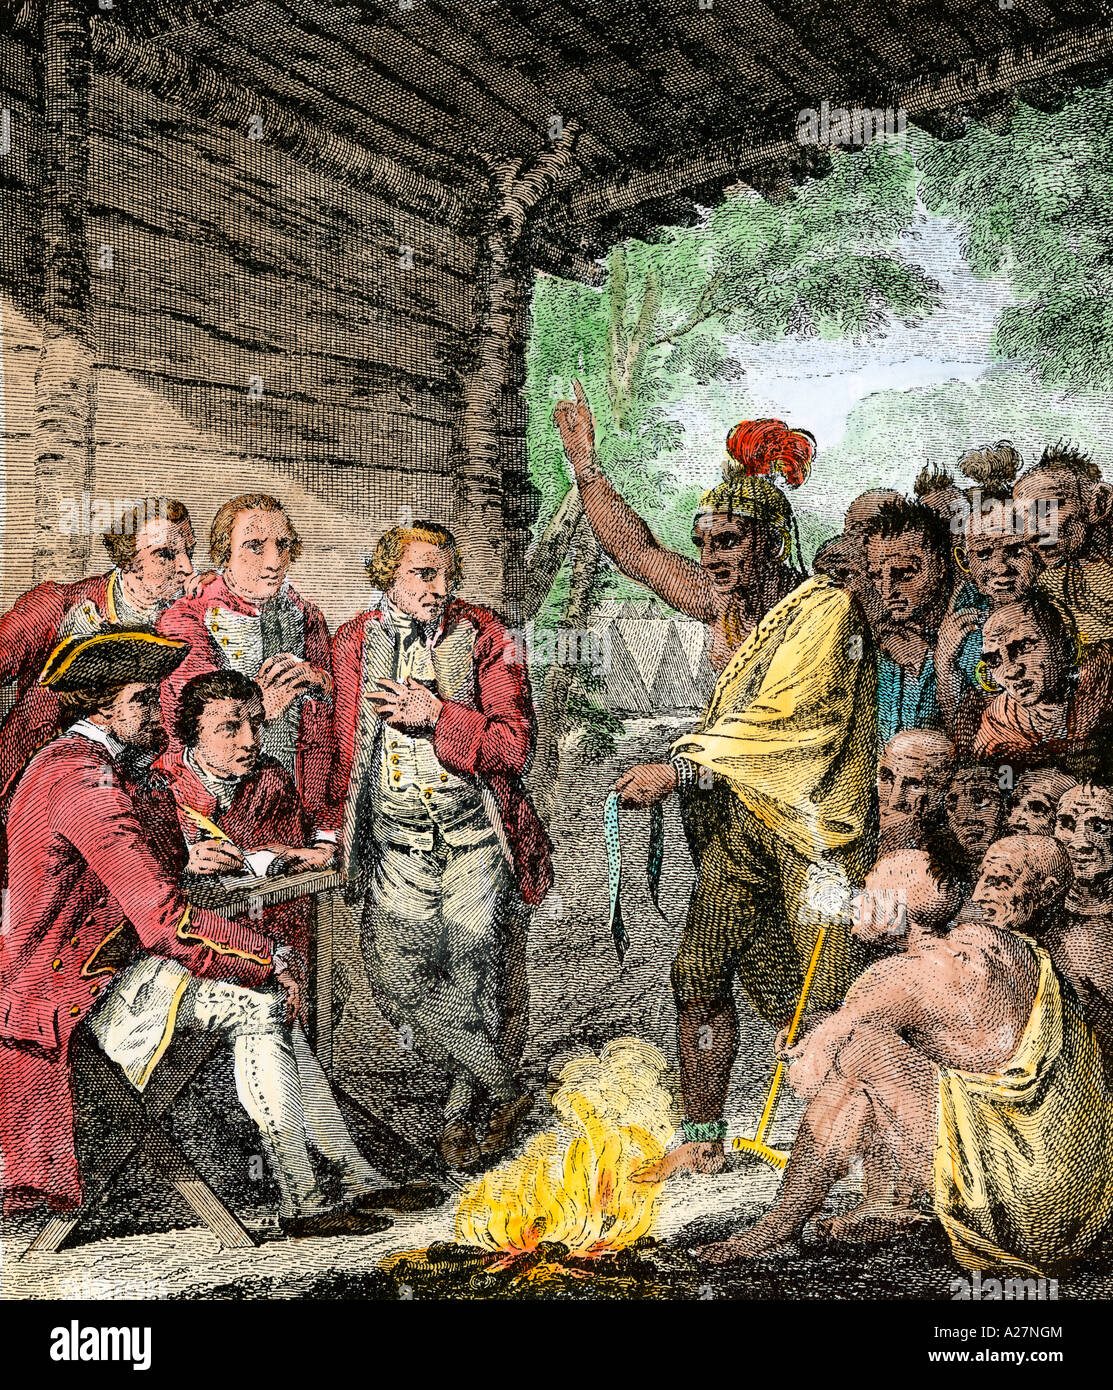 British General Henry Bouquet meeting with Native Americans during Pontiacs War 1763. Hand-colored halftone of an illustration Stock Photo